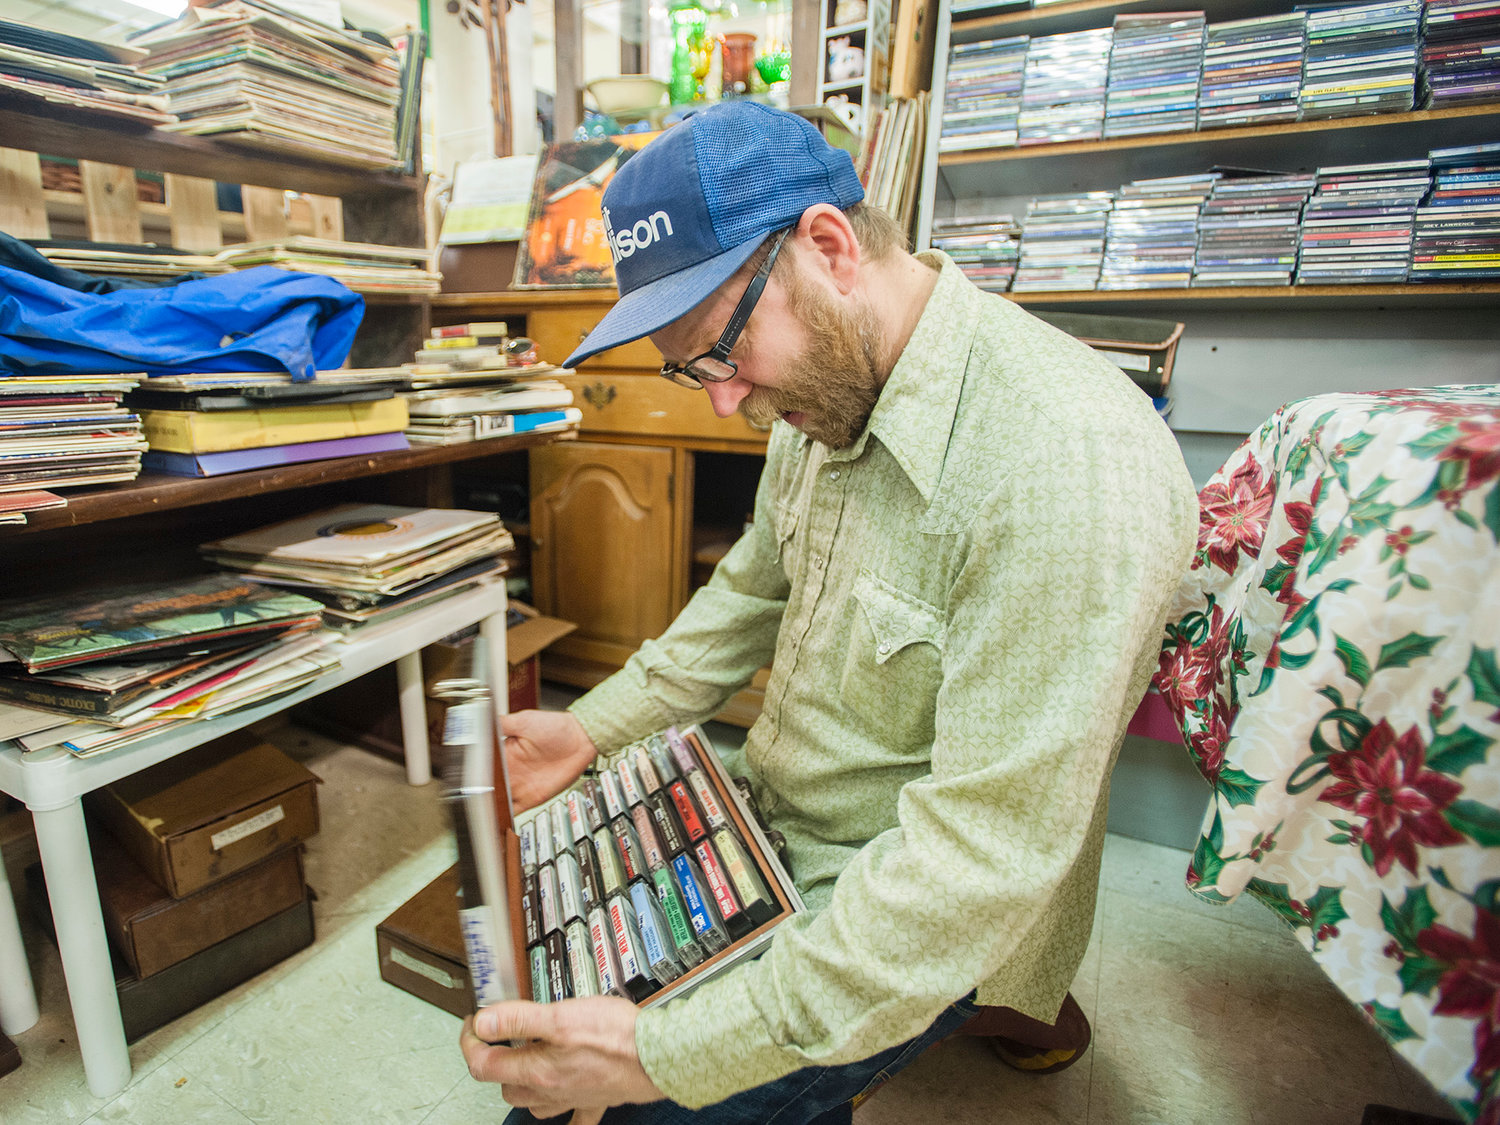 Mat Griesse, Chehalis, looks through cassette tapes at Cowlitz River Antiques at Yard Birds Mall in Chehalis on Monday, March 3, 2014.